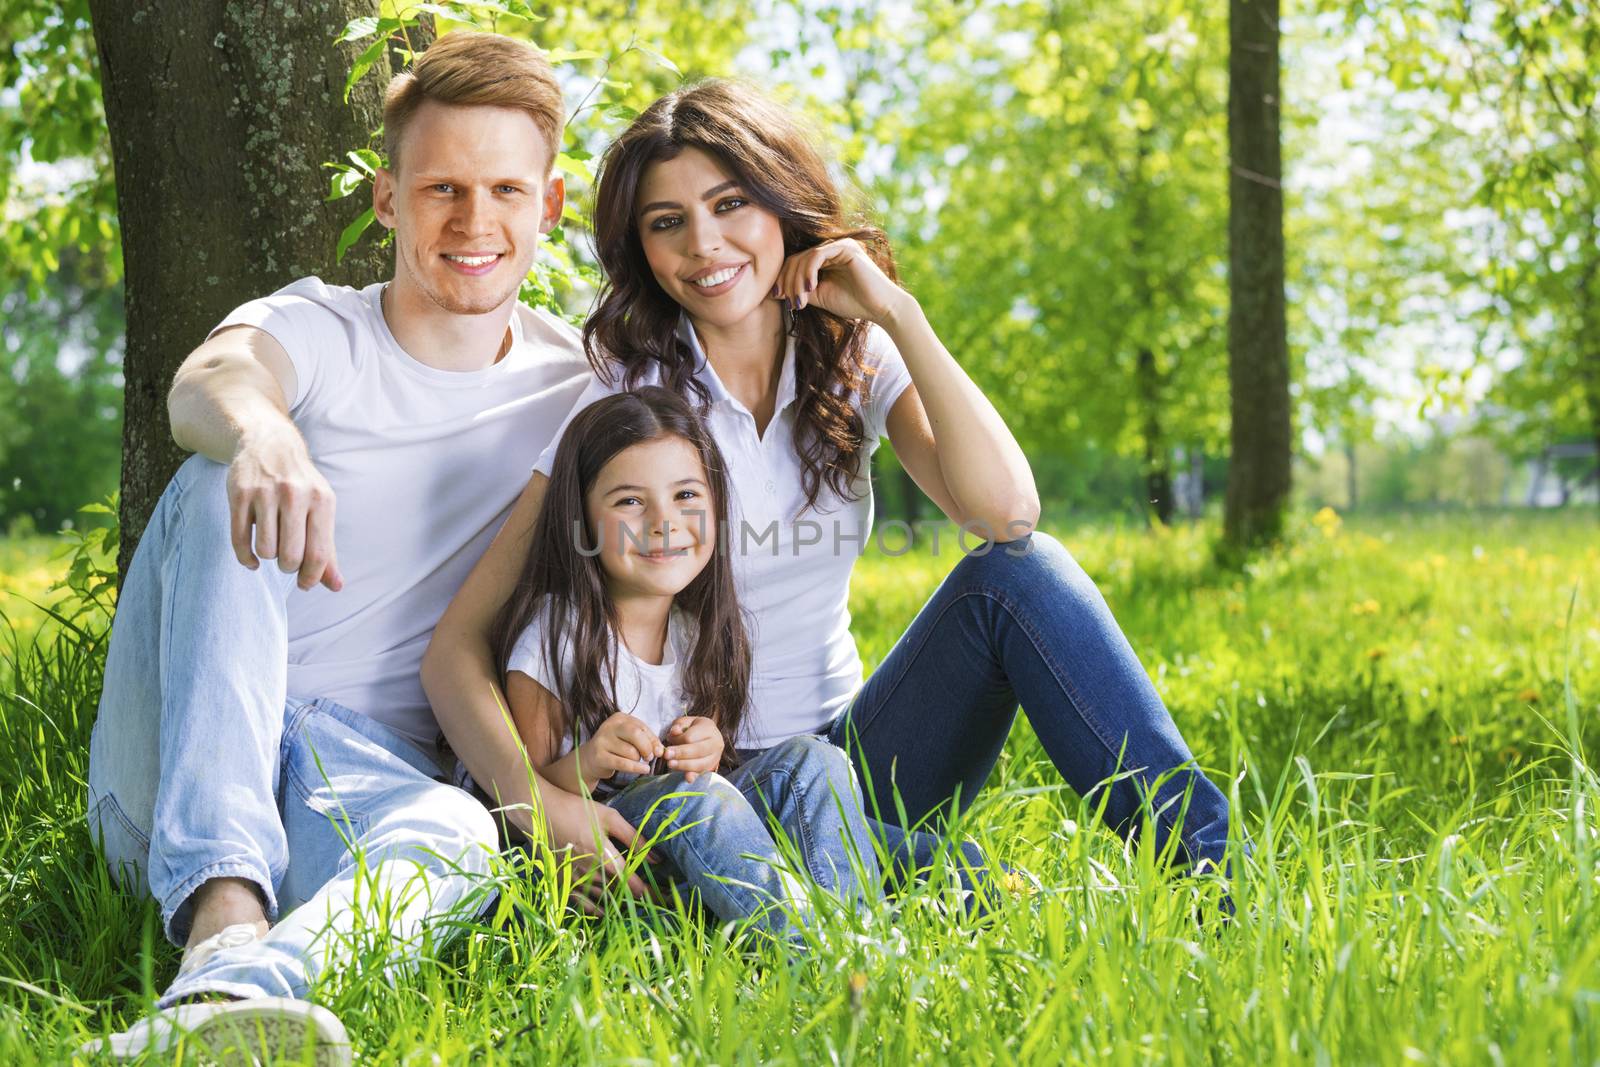 Portrait of happy family sitting on grass under a tree in park on a sunny day